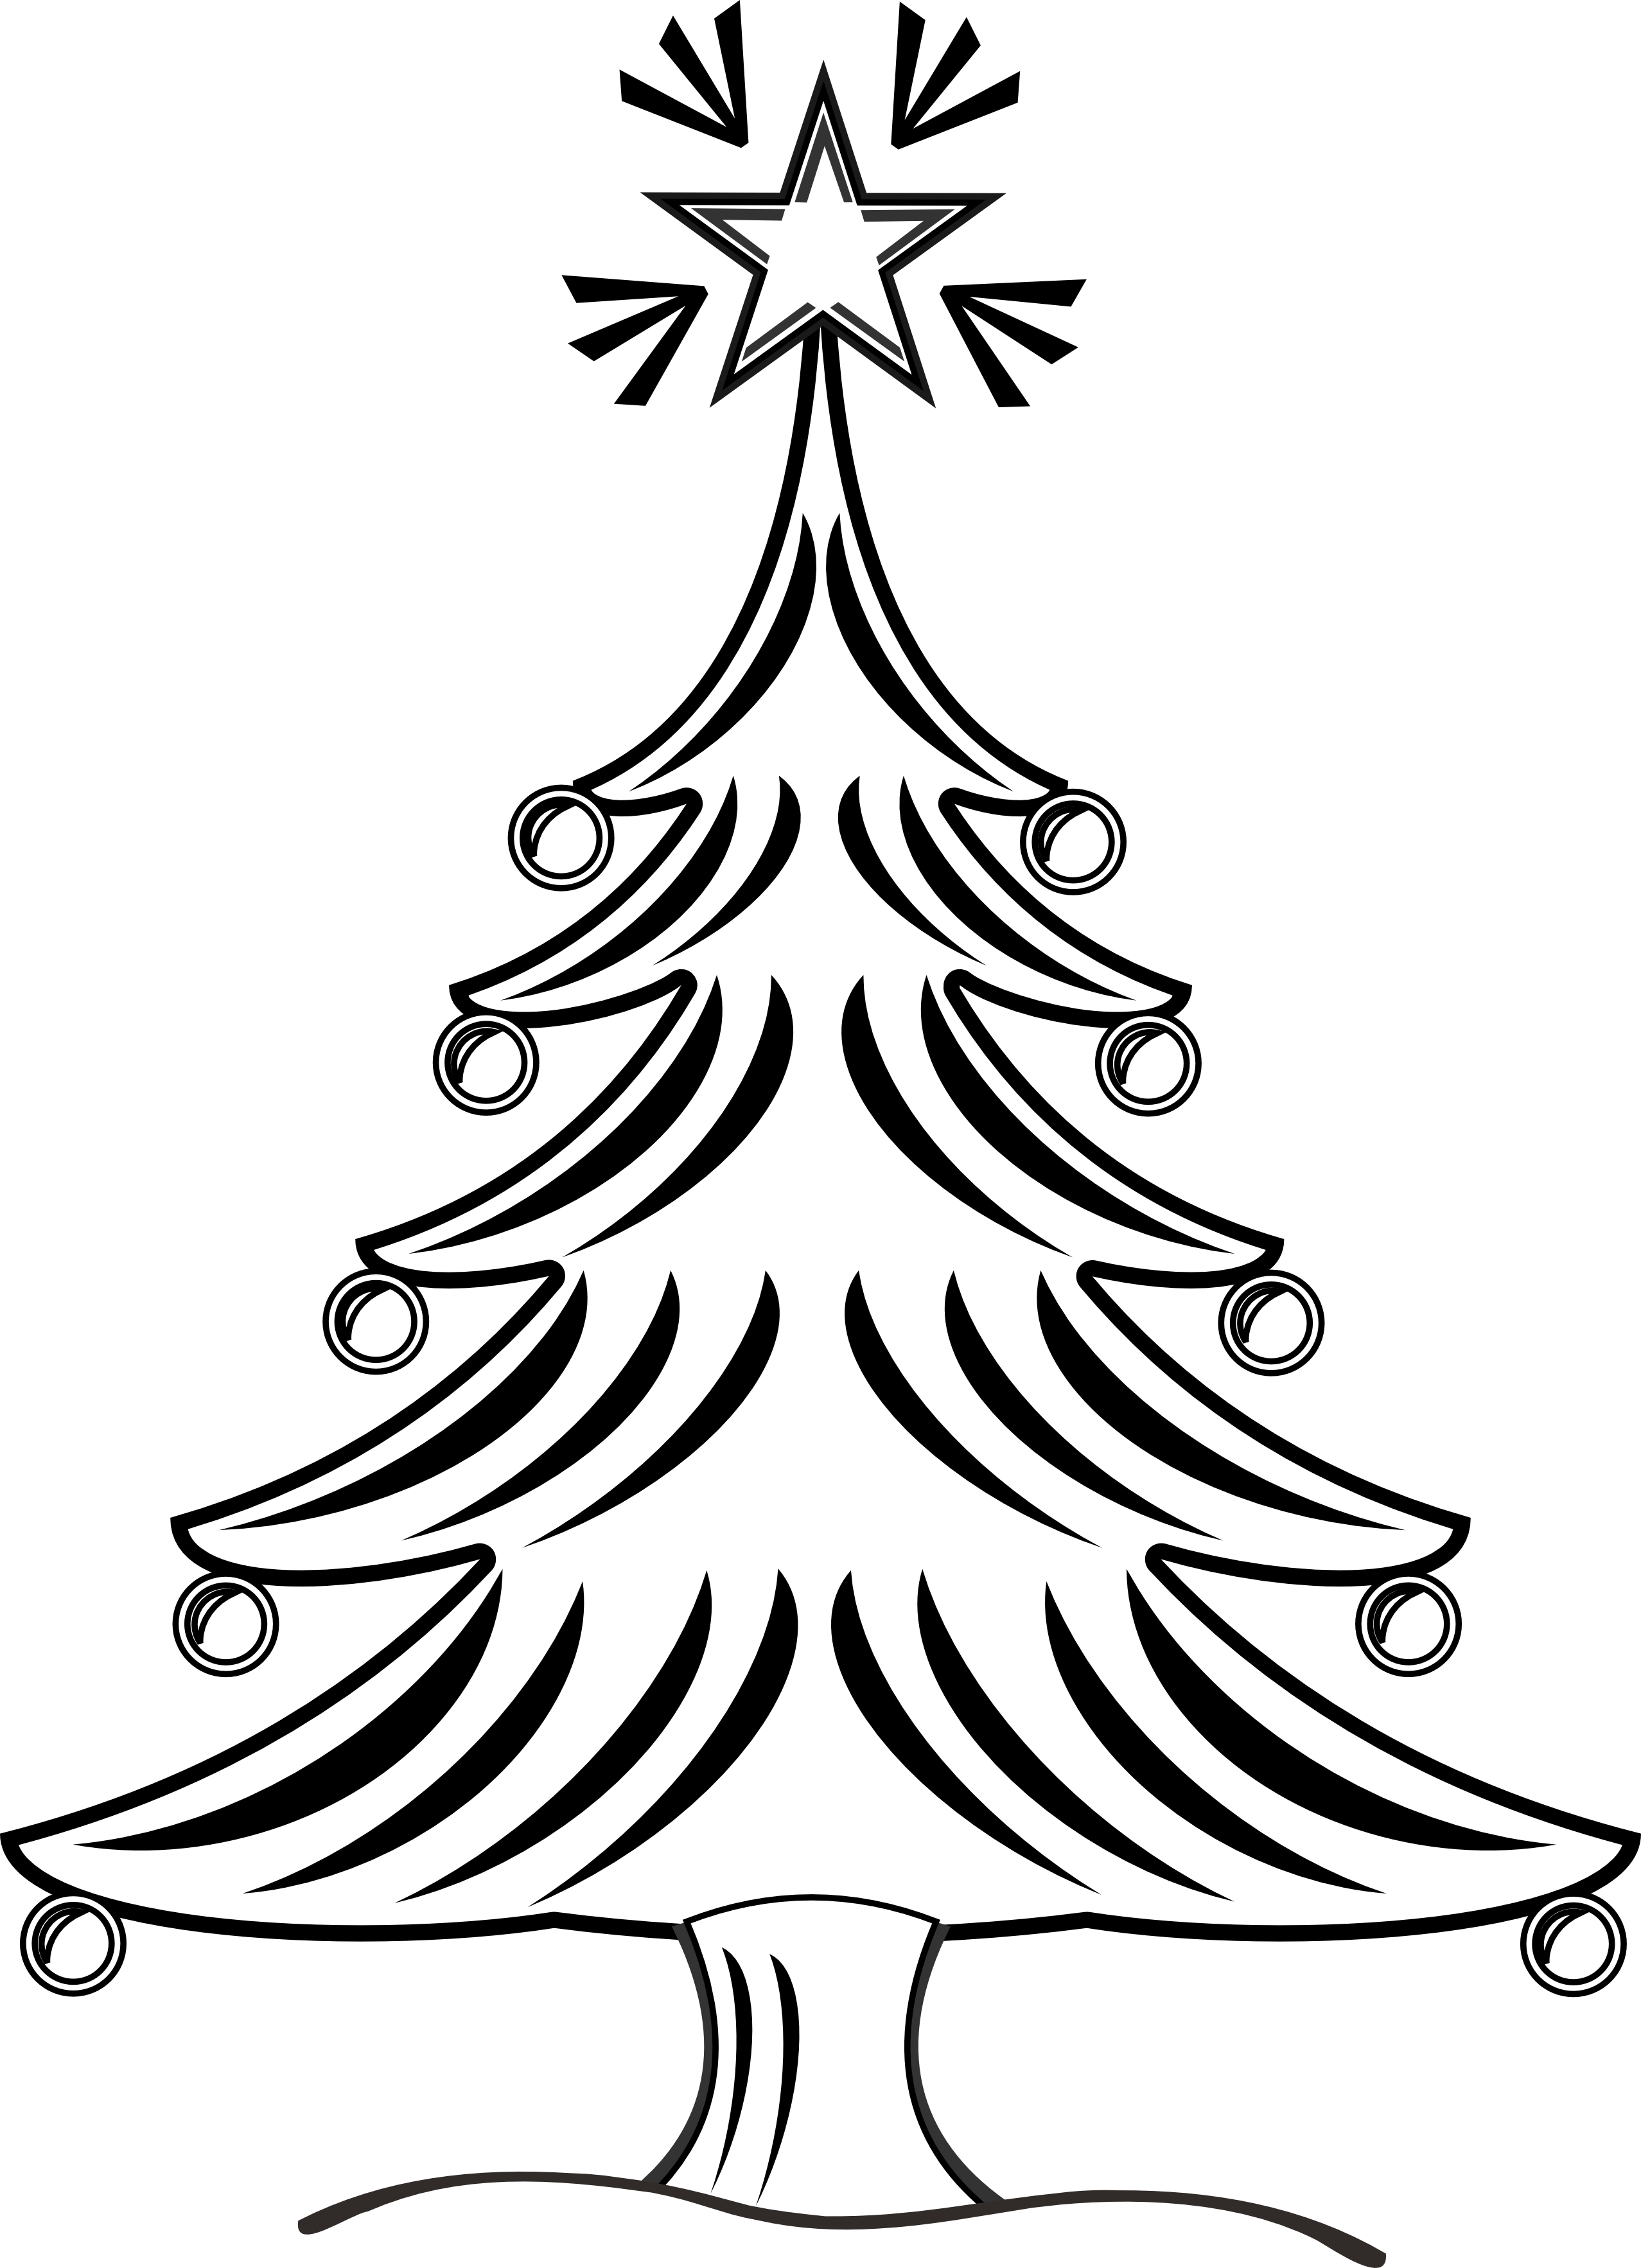 Christmas Tree Sketch Images - Christmas Tree Sketch Images (2555x3531)